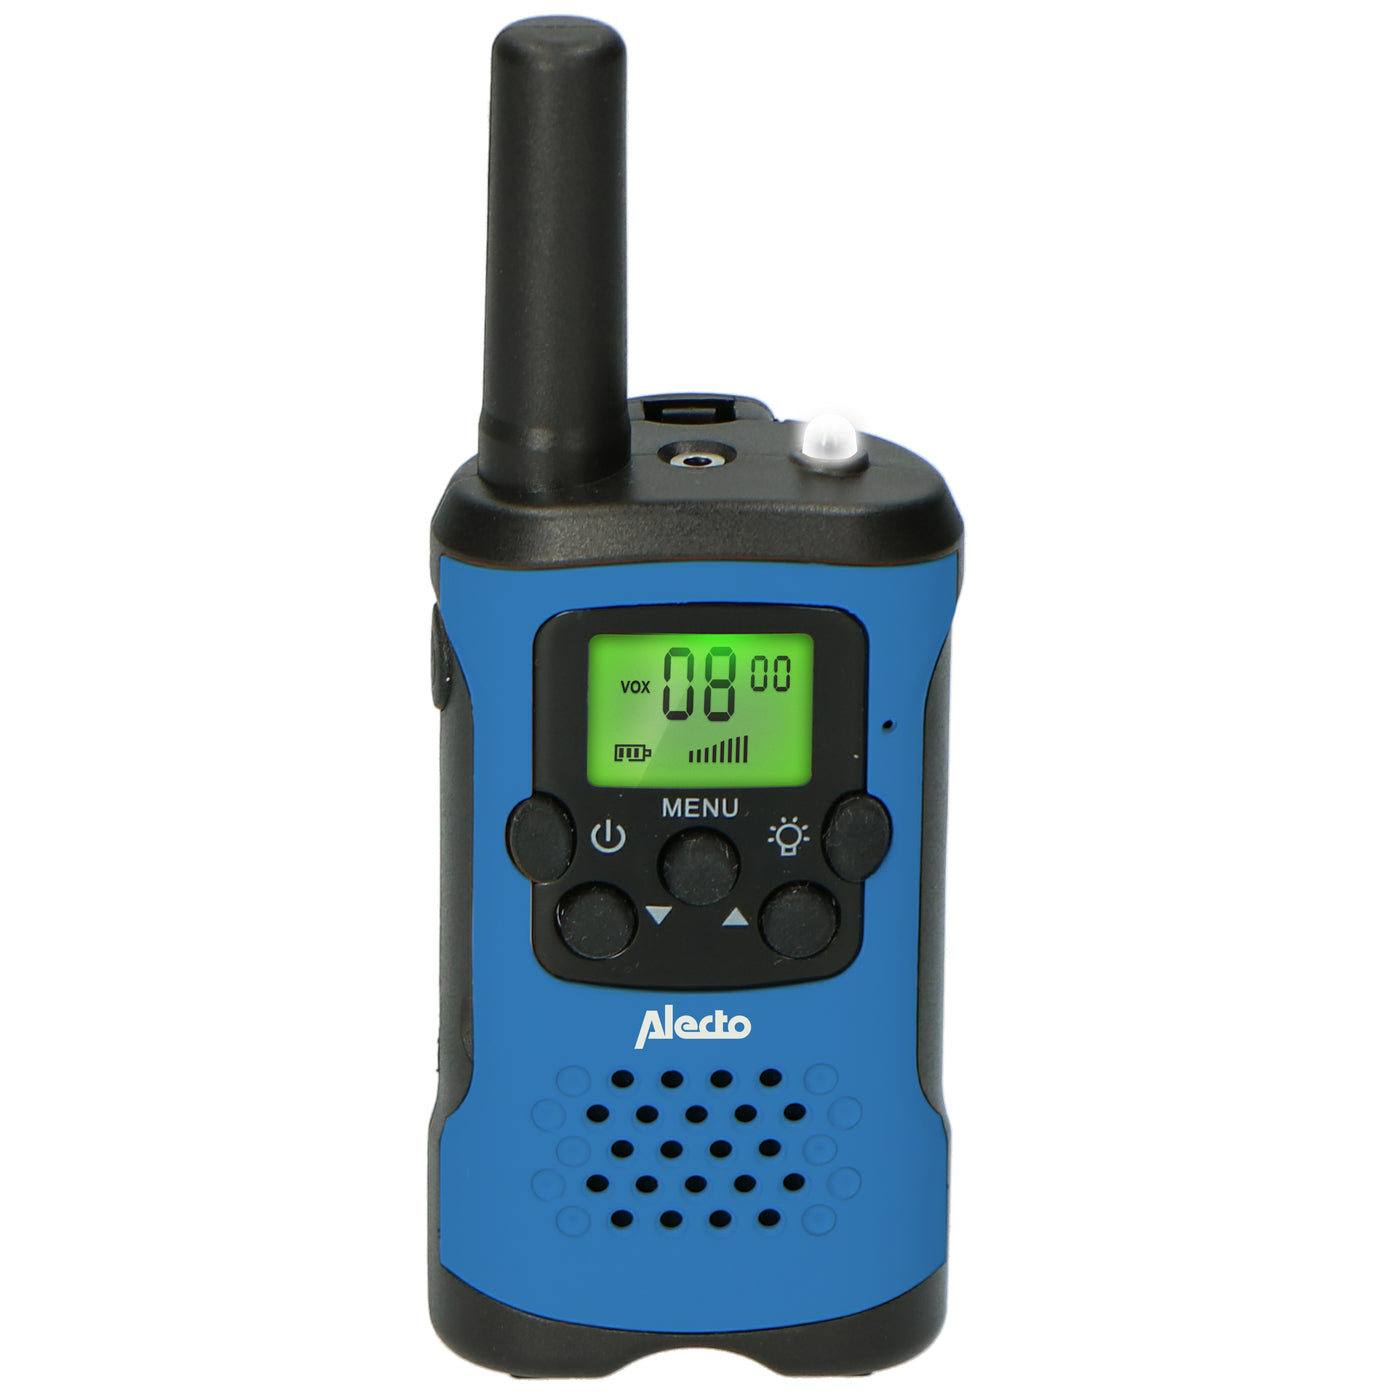 Alecto FR-115BW - Set of two Two-Way radios for children, range up to 7 kilometers, blue/black